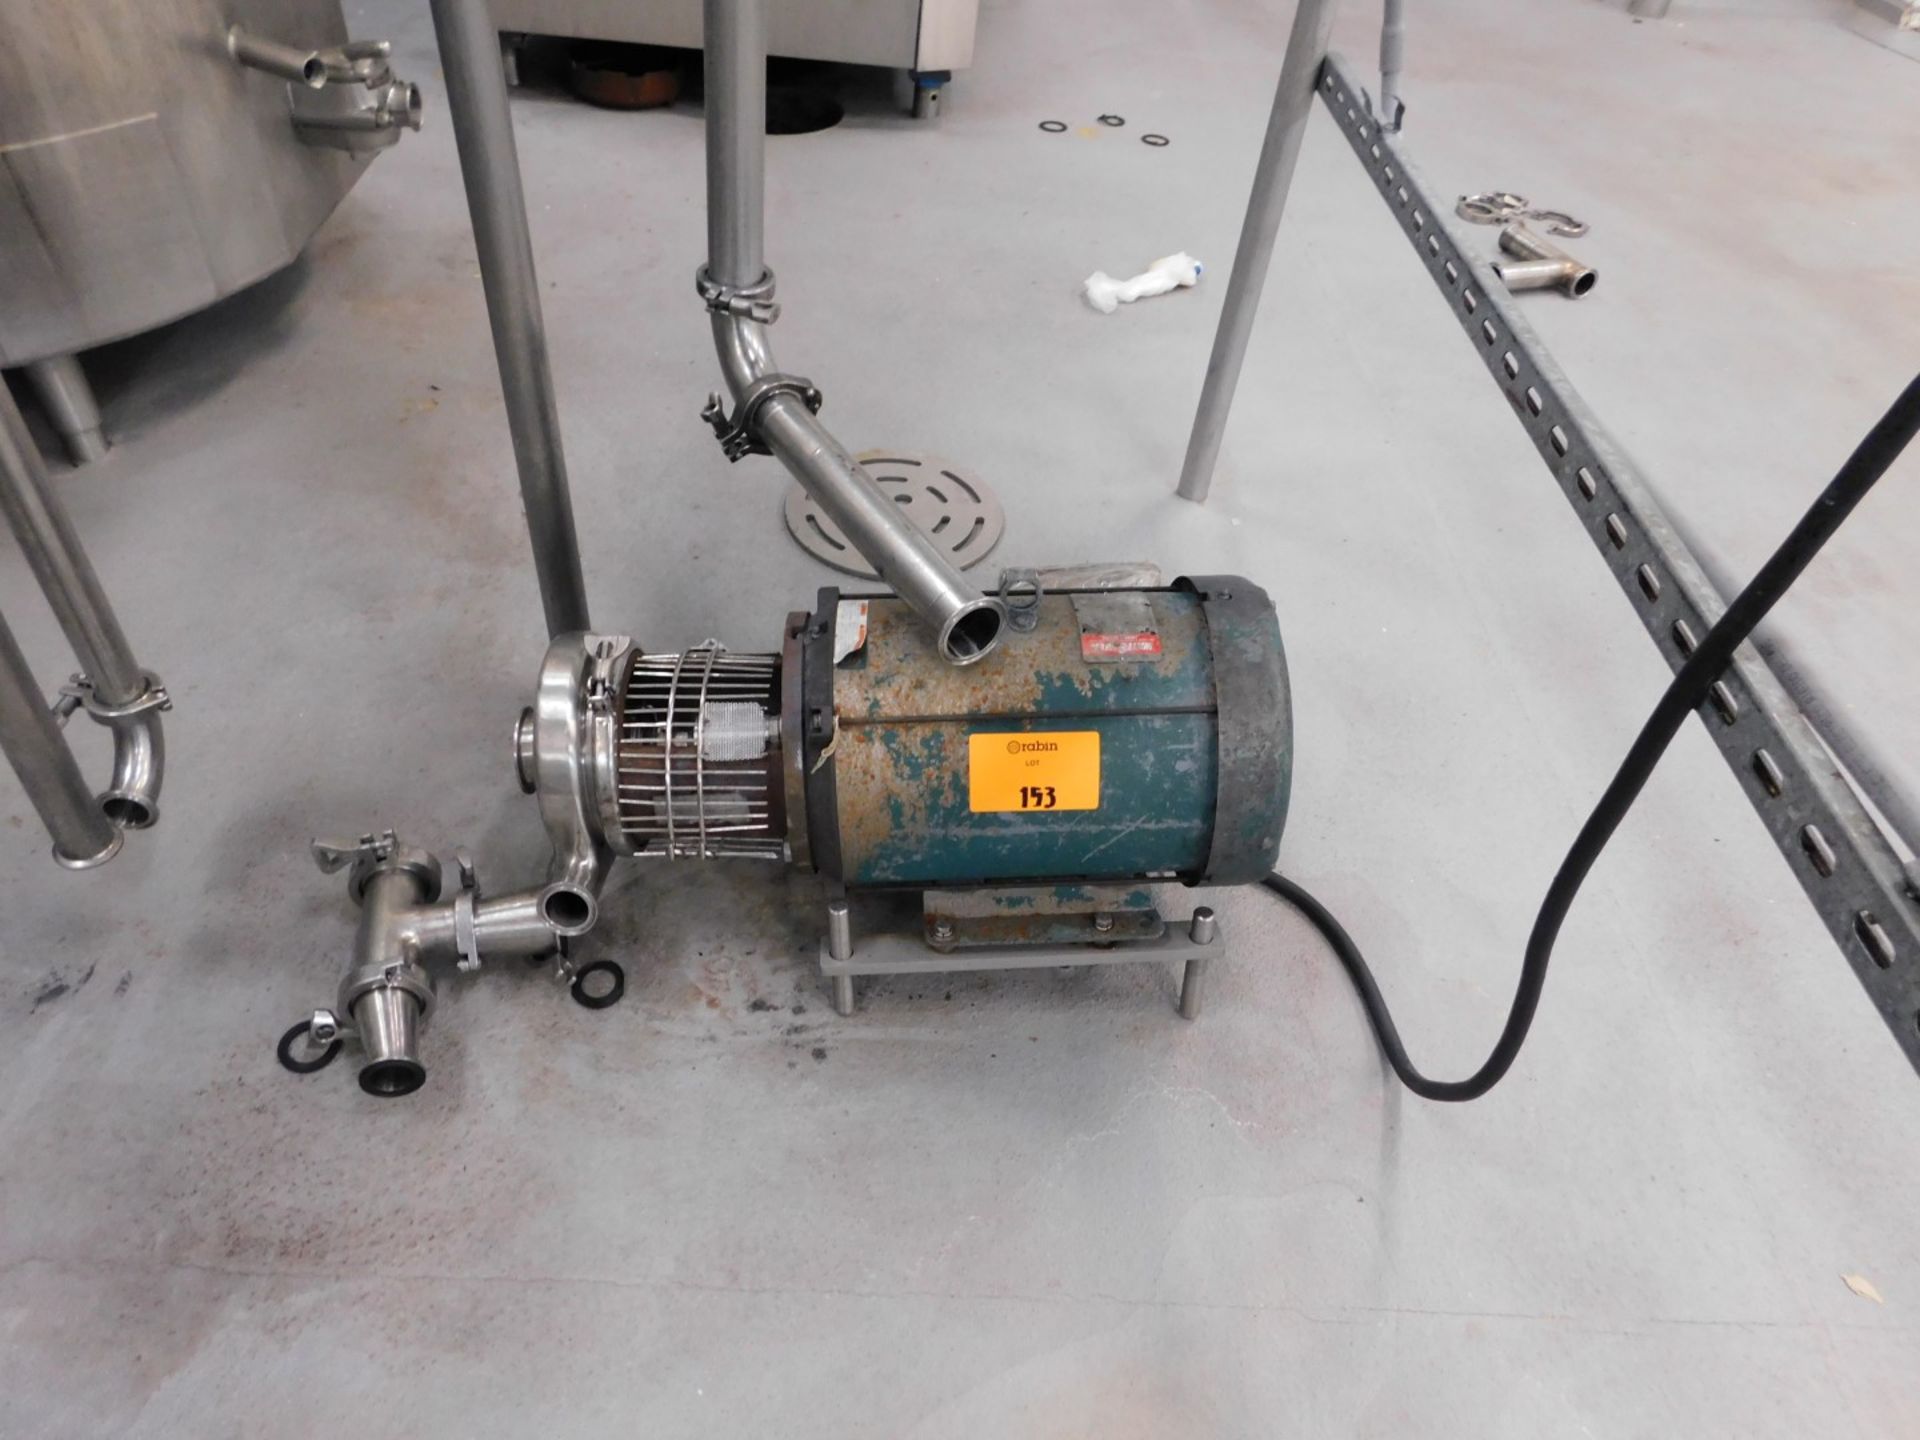 Stainless Centrifugal Pump